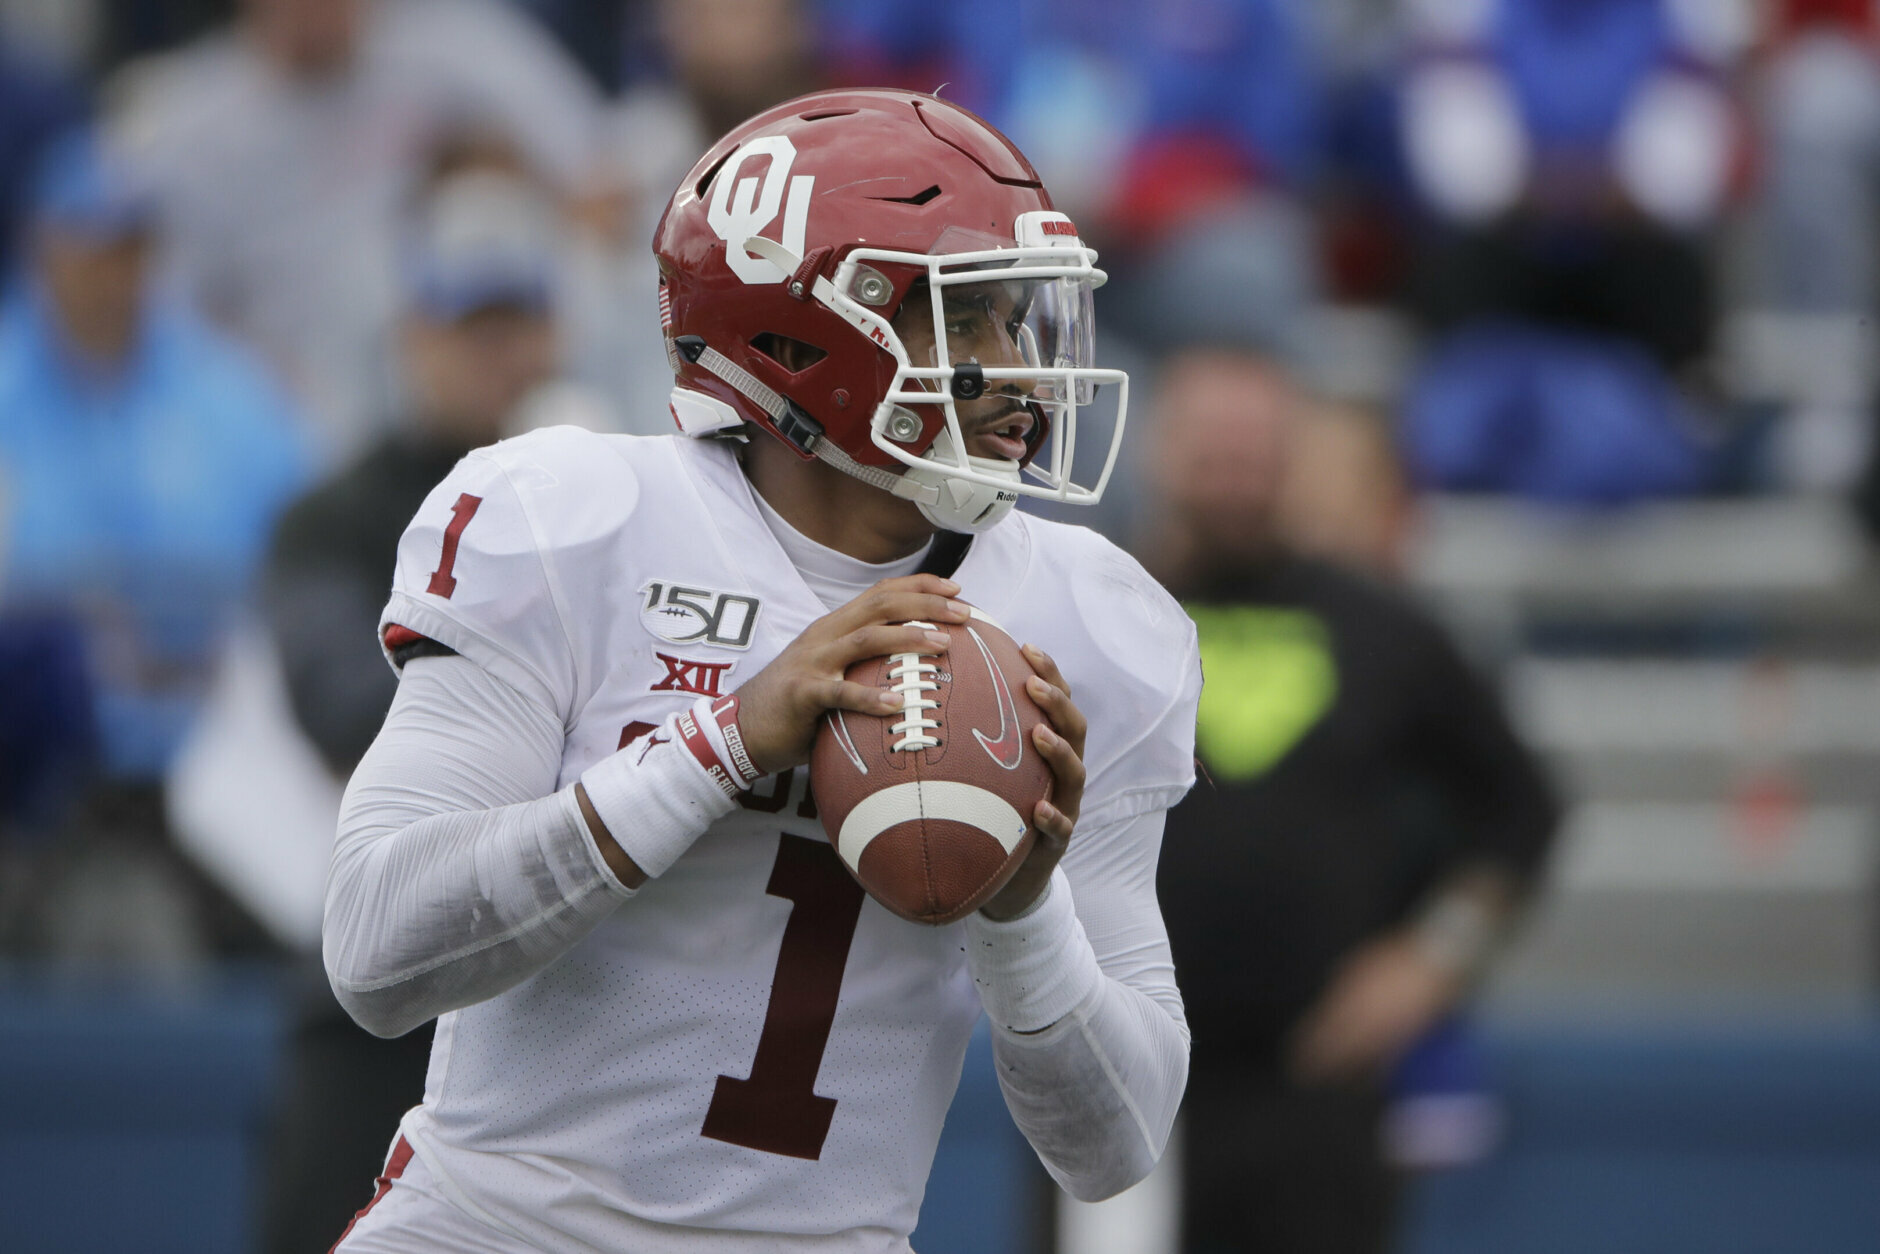 <p><b>Round 3 (66th overall) &#8211;</b> <b>QB Jalen Hurts, Oklahoma</b></p>
<p>Look, I&#8217;m not saying Hurts is the next Russell Wilson or Dak Prescott, but he&#8217;s probably better than his draft status will likely reflect. Tight end and offensive tackle are certainly bigger needs in Washington, but if Rivera and OC Scott Turner think Hurts — who&#8217;s a closer comparison to what they had in Carolina with Cam Newton — can be a quality, long-term option if Dwayne Haskins struggles, it&#8217;s value too good to pass up here — especially if it keeps rival Dallas from making Hurts a cheap replacement for Dak.</p>
<p>If the Redskins go more need-oriented with this pick, Notre Dame tight end Cole Kmet or TCU offensive tackle Lucas Niang are good possibilities.</p>
